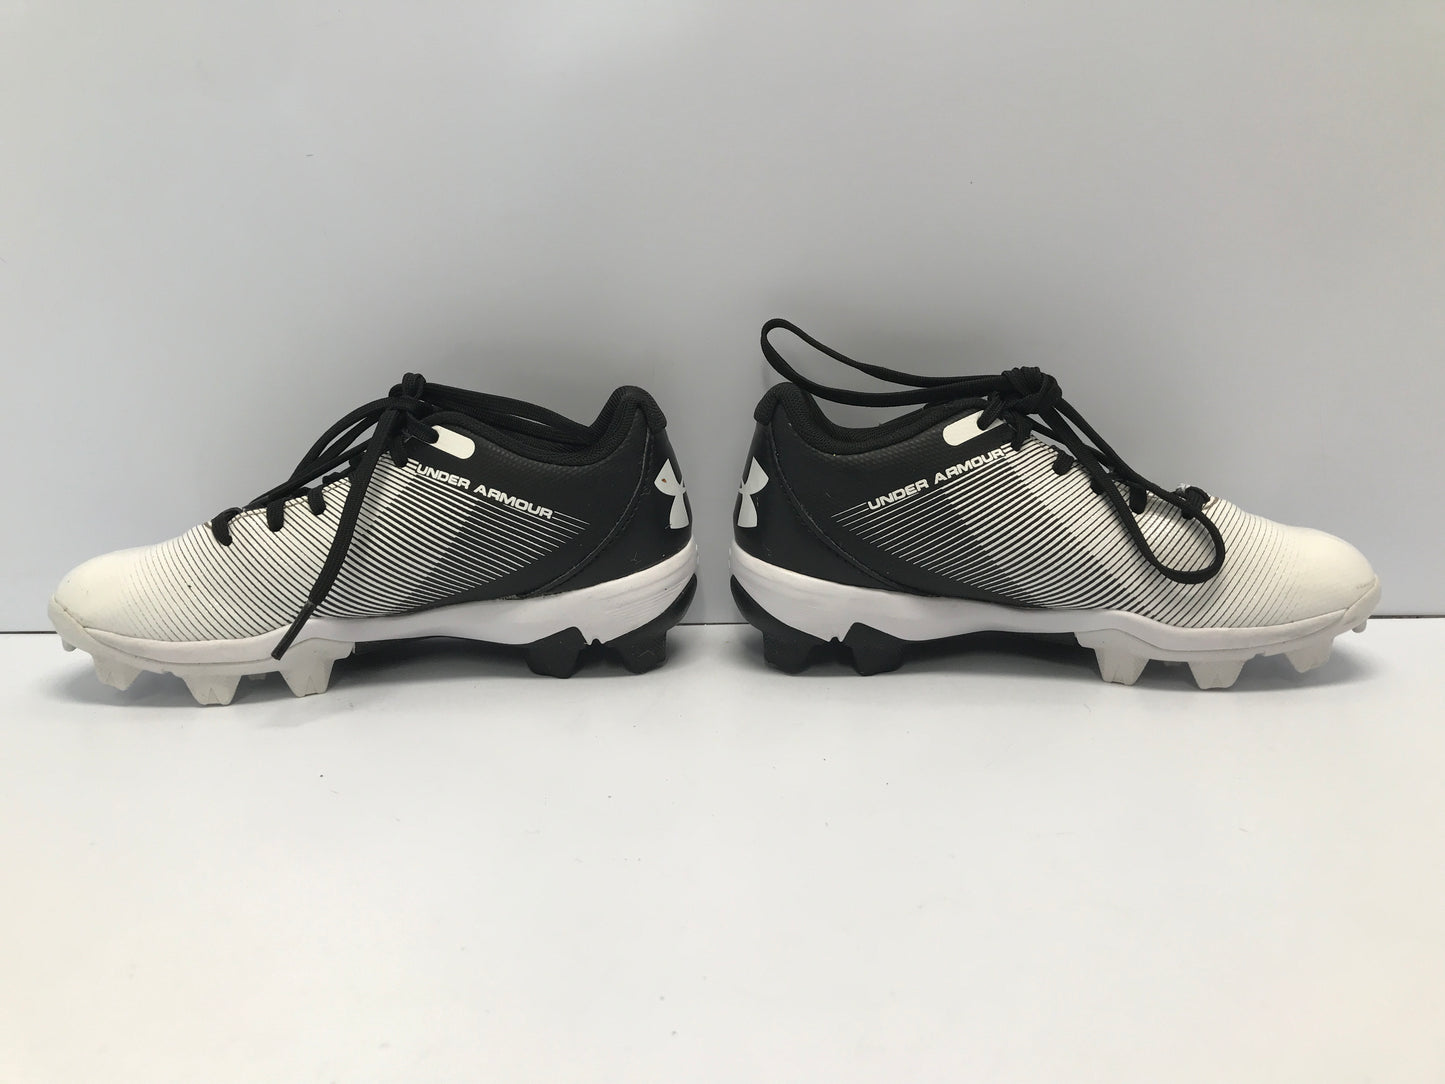 Baseball Shoes Cleats Child Size 1 Under Armour Black White Like New